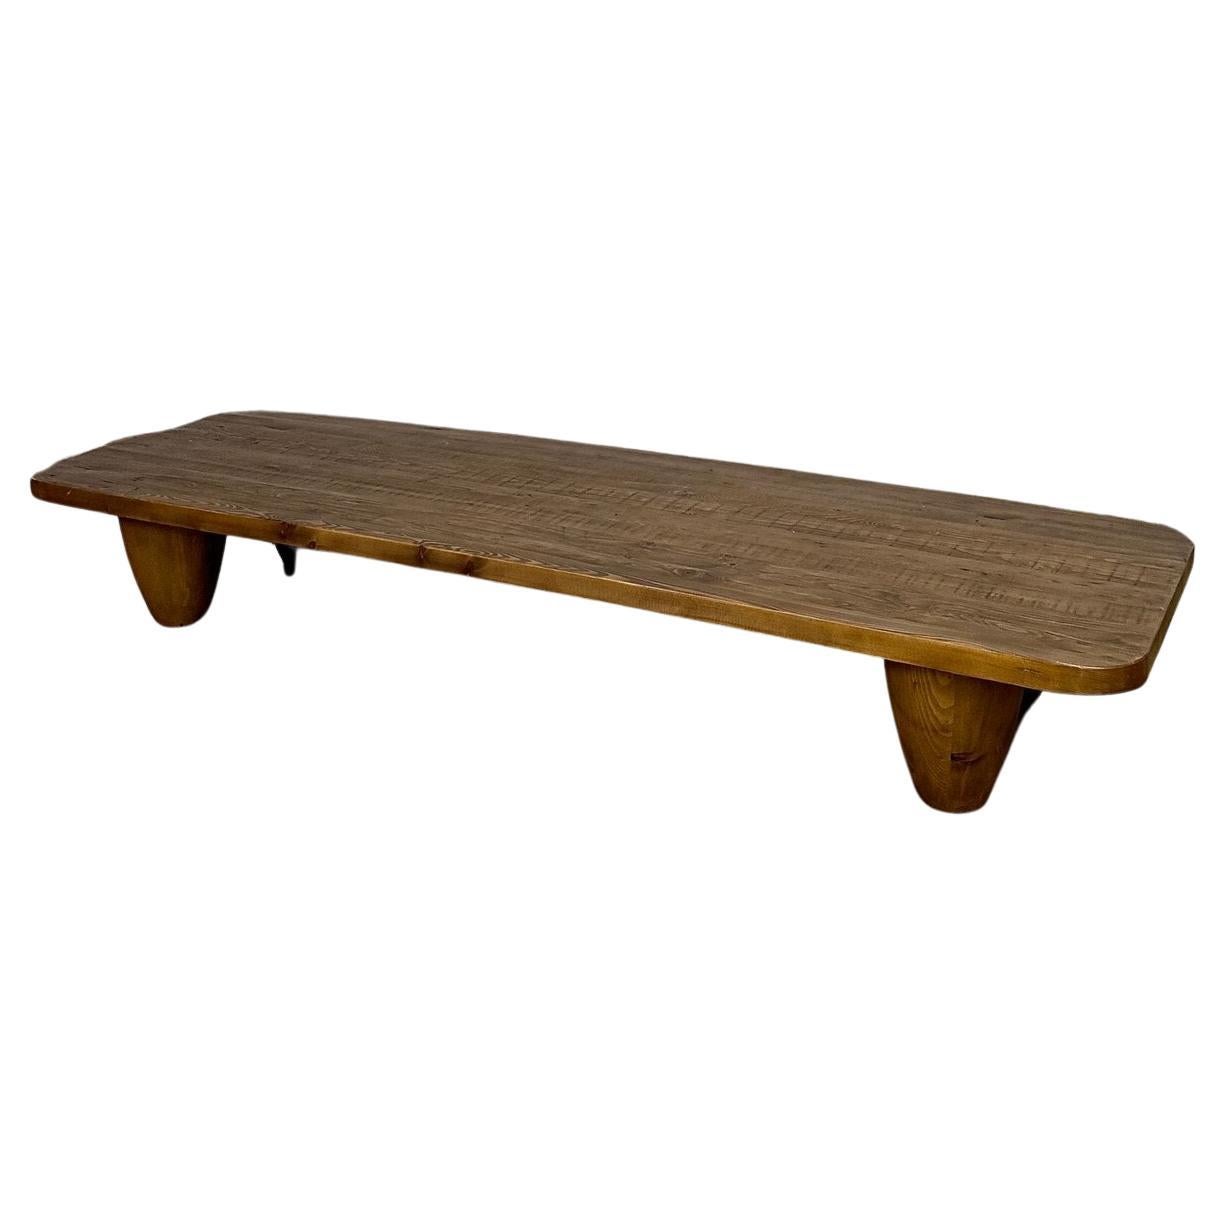 “Theo” Primitive Coffee Table by Penny Six- Light Stain